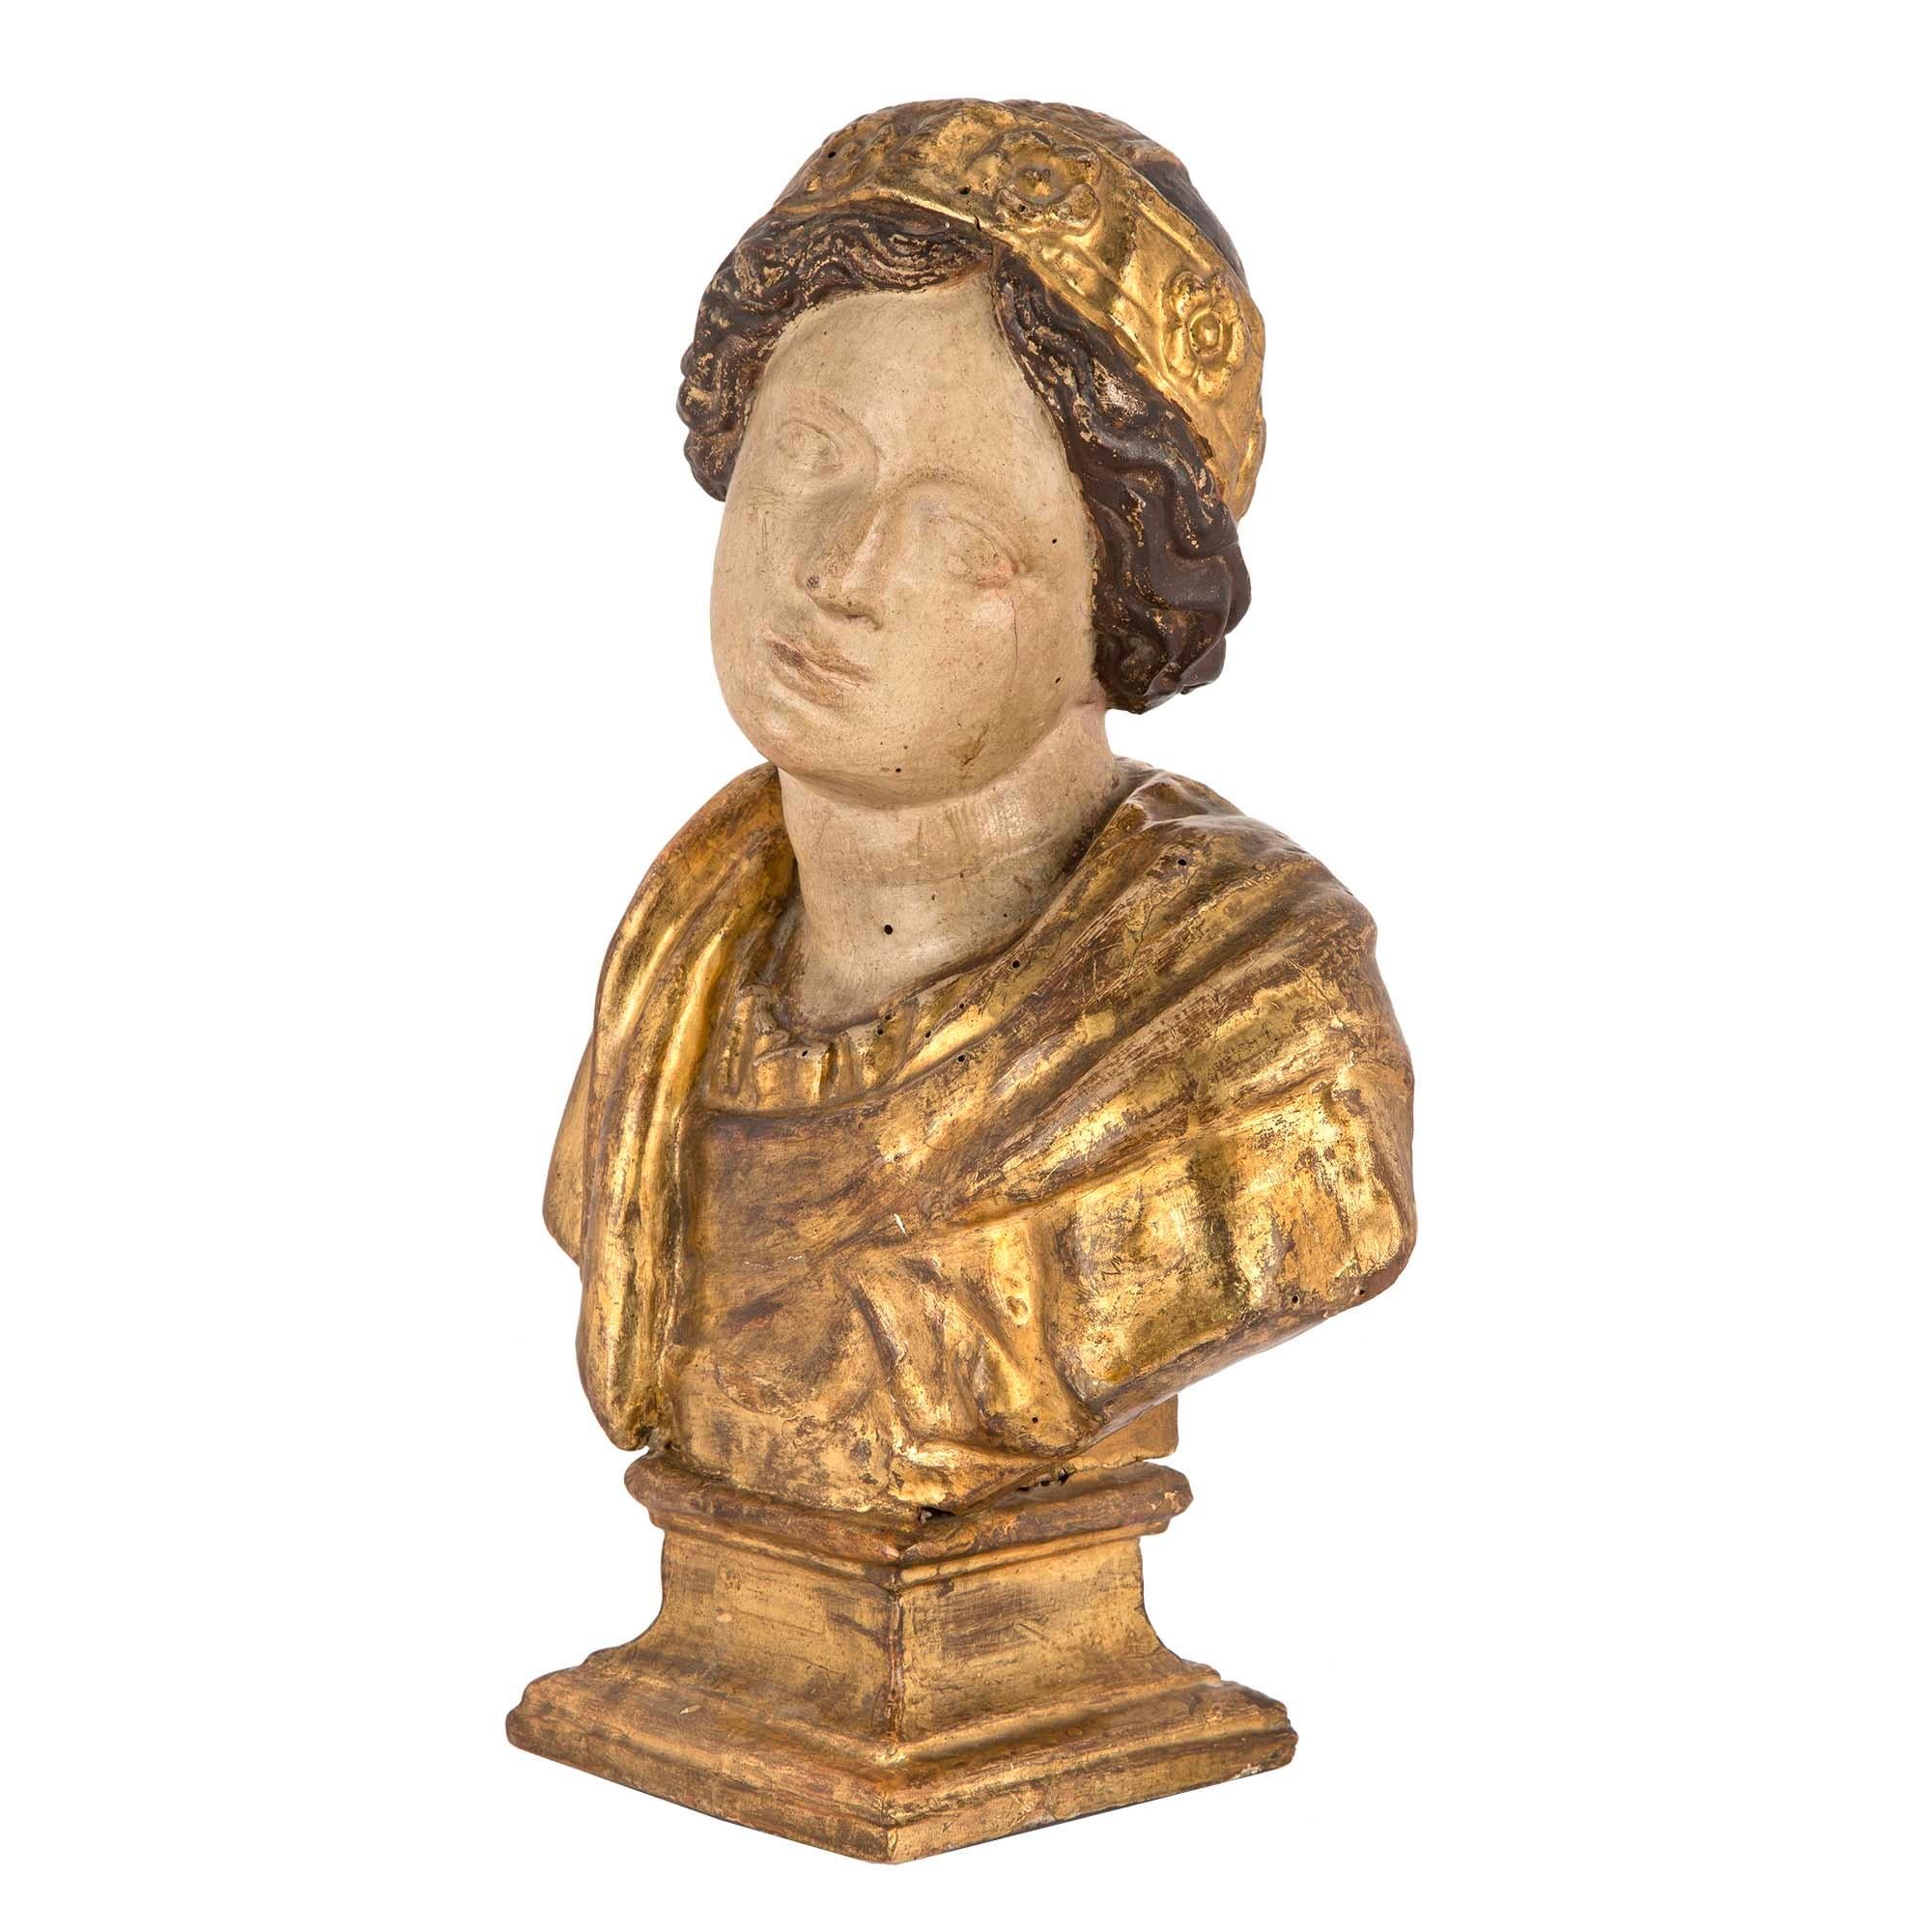 A very handsome Italian mid-17th century Baroque period giltwood and polychrome bust. The bust of an Italian scholar is raised on a giltwood rectangular mottled base. Shown with a giltwood classical drape below the polychrome face and neck. The bust